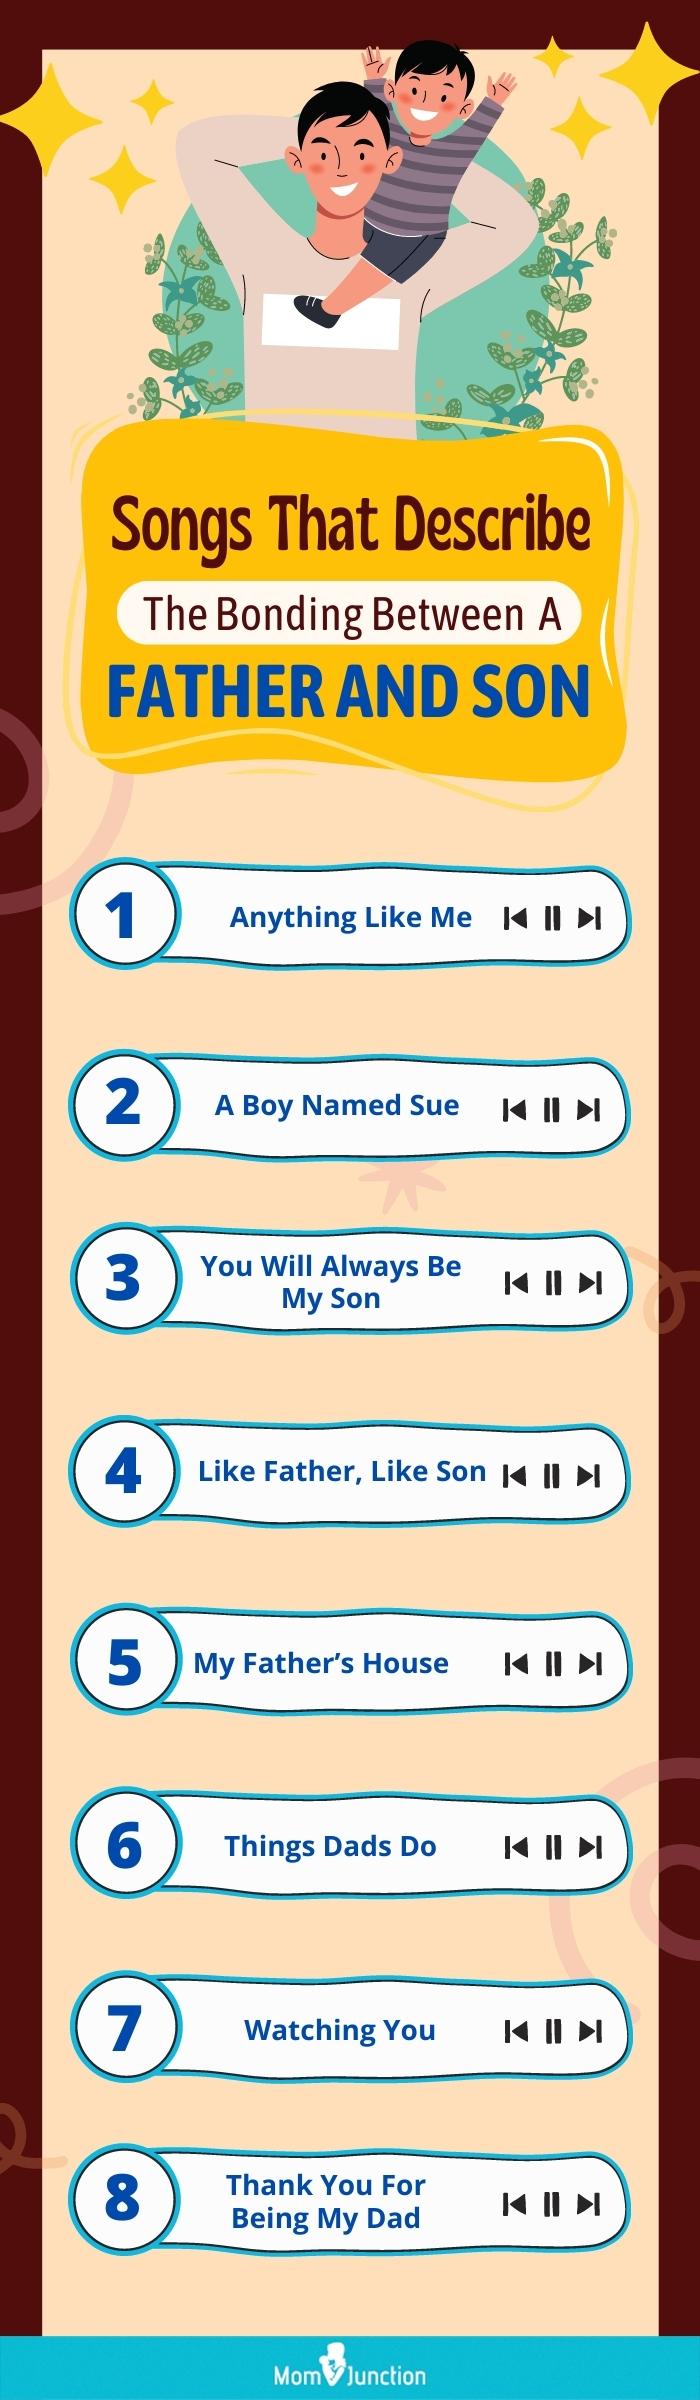 songs about fathers and sons (infographic)